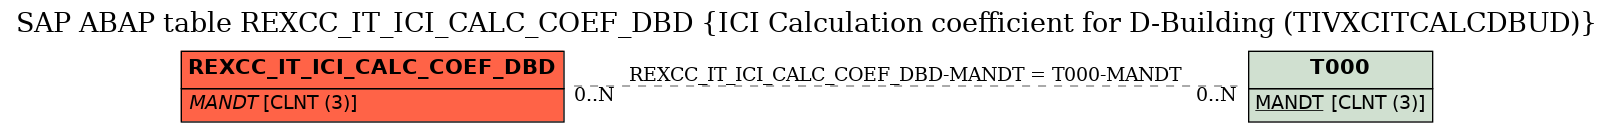 E-R Diagram for table REXCC_IT_ICI_CALC_COEF_DBD (ICI Calculation coefficient for D-Building (TIVXCITCALCDBUD))